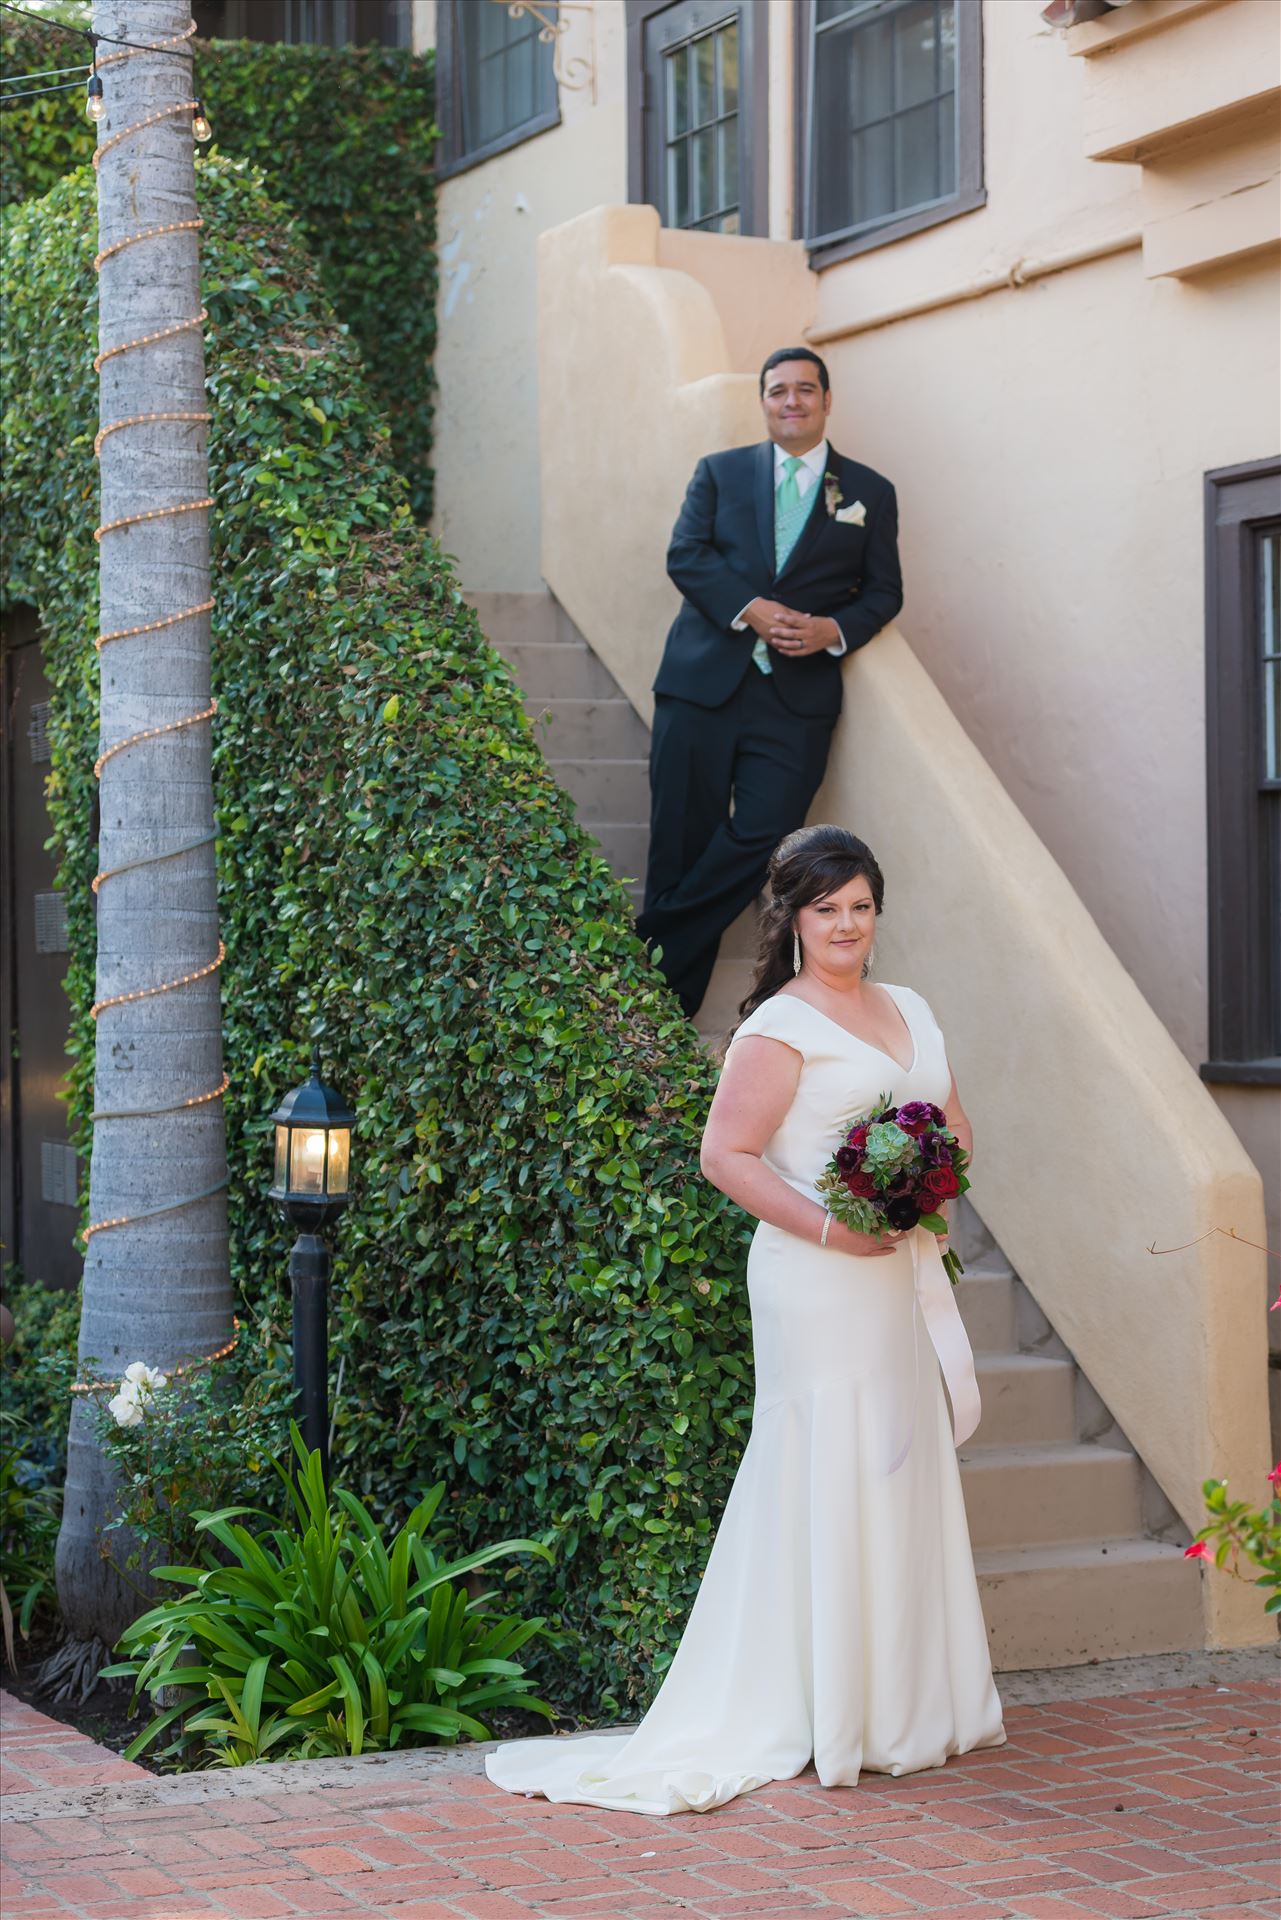 Mary and Alejandro 17 - Wedding photography at the Historic Santa Maria Inn in Santa Maria, California by Mirror's Edge Photography. Bride and Groom on the Ivy Staircase. by Sarah Williams